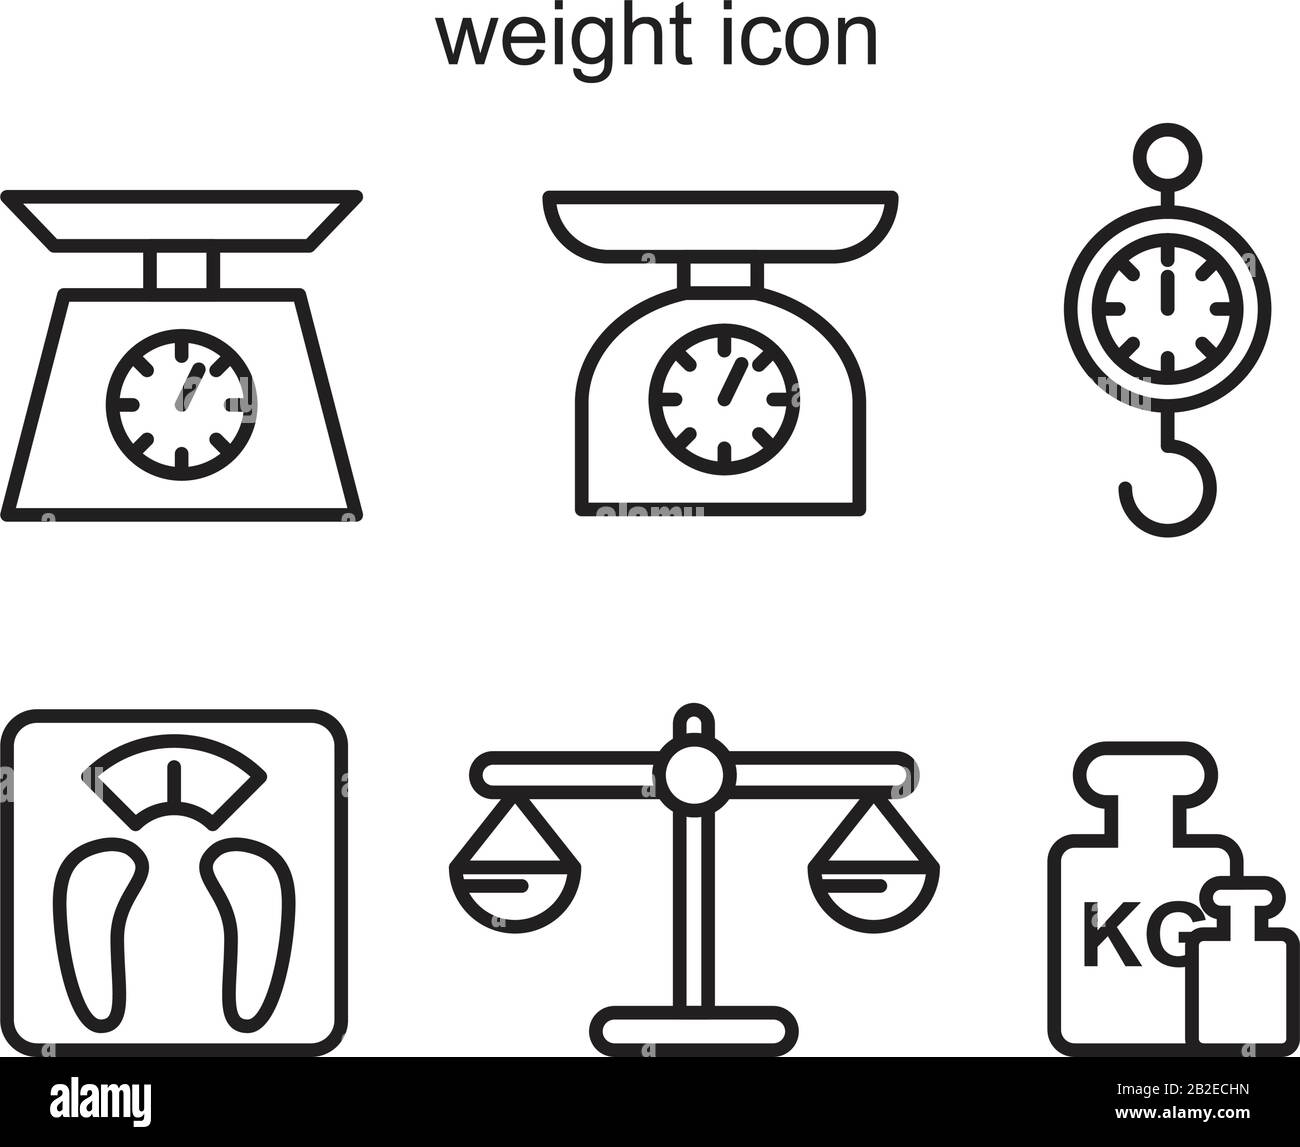 Weight icon template black color editable. Weight icon symbol Flat vector illustration for graphic and web design. Stock Vector